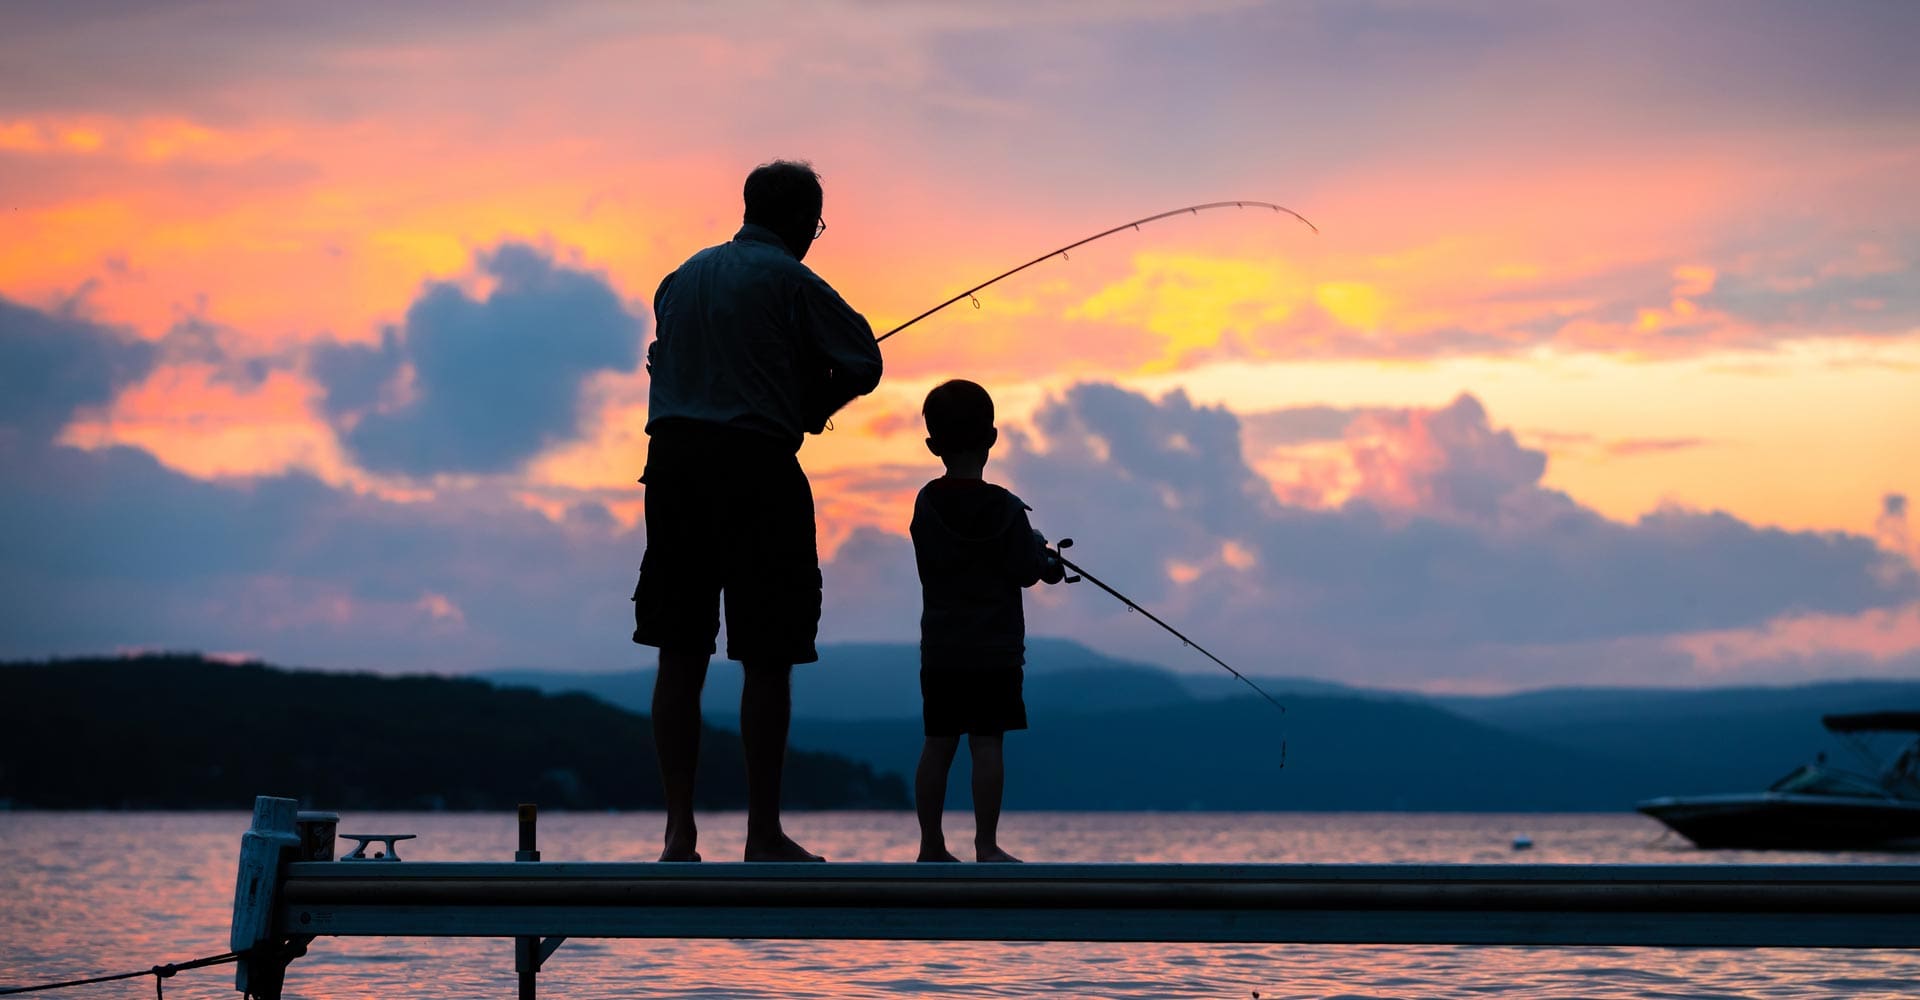 Silhouette of grandad and grandchild fishing at sunset